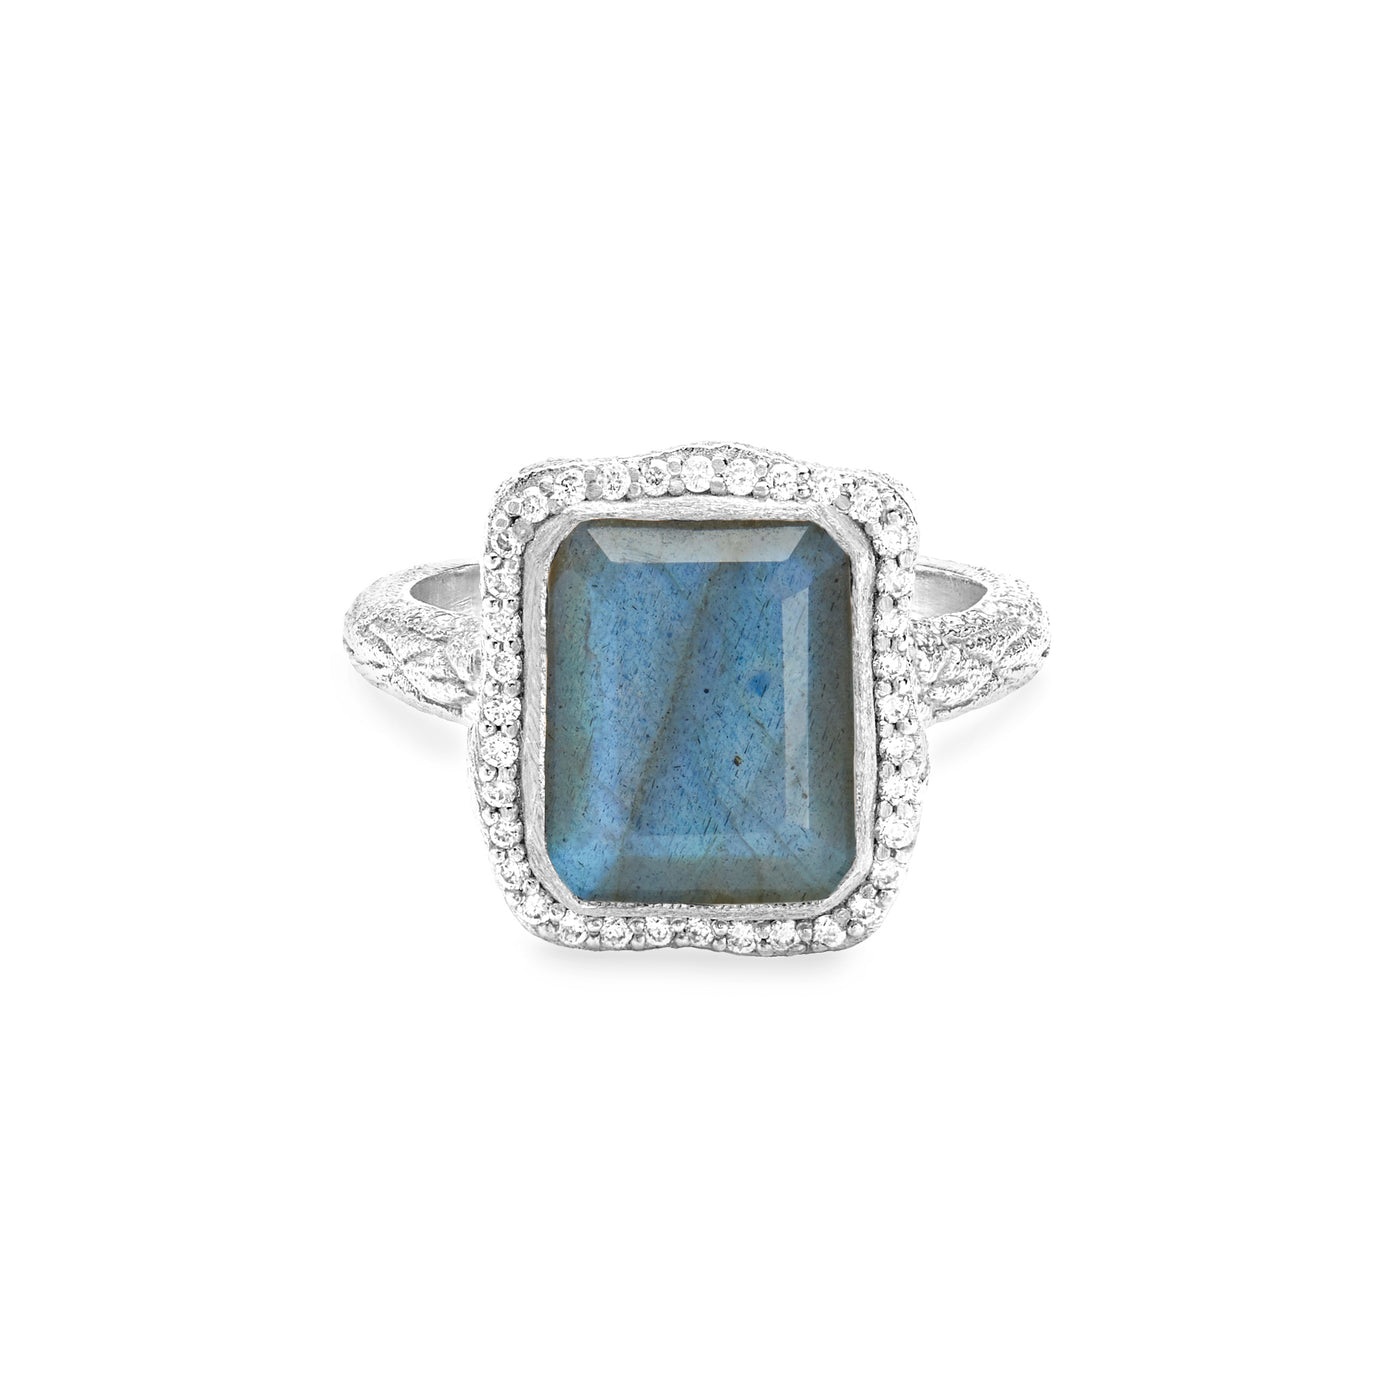 14 Karat Yellow Gold Ring with Rectangle Shaped Labradorite Stone with Halo of White Diamonds Against White Background